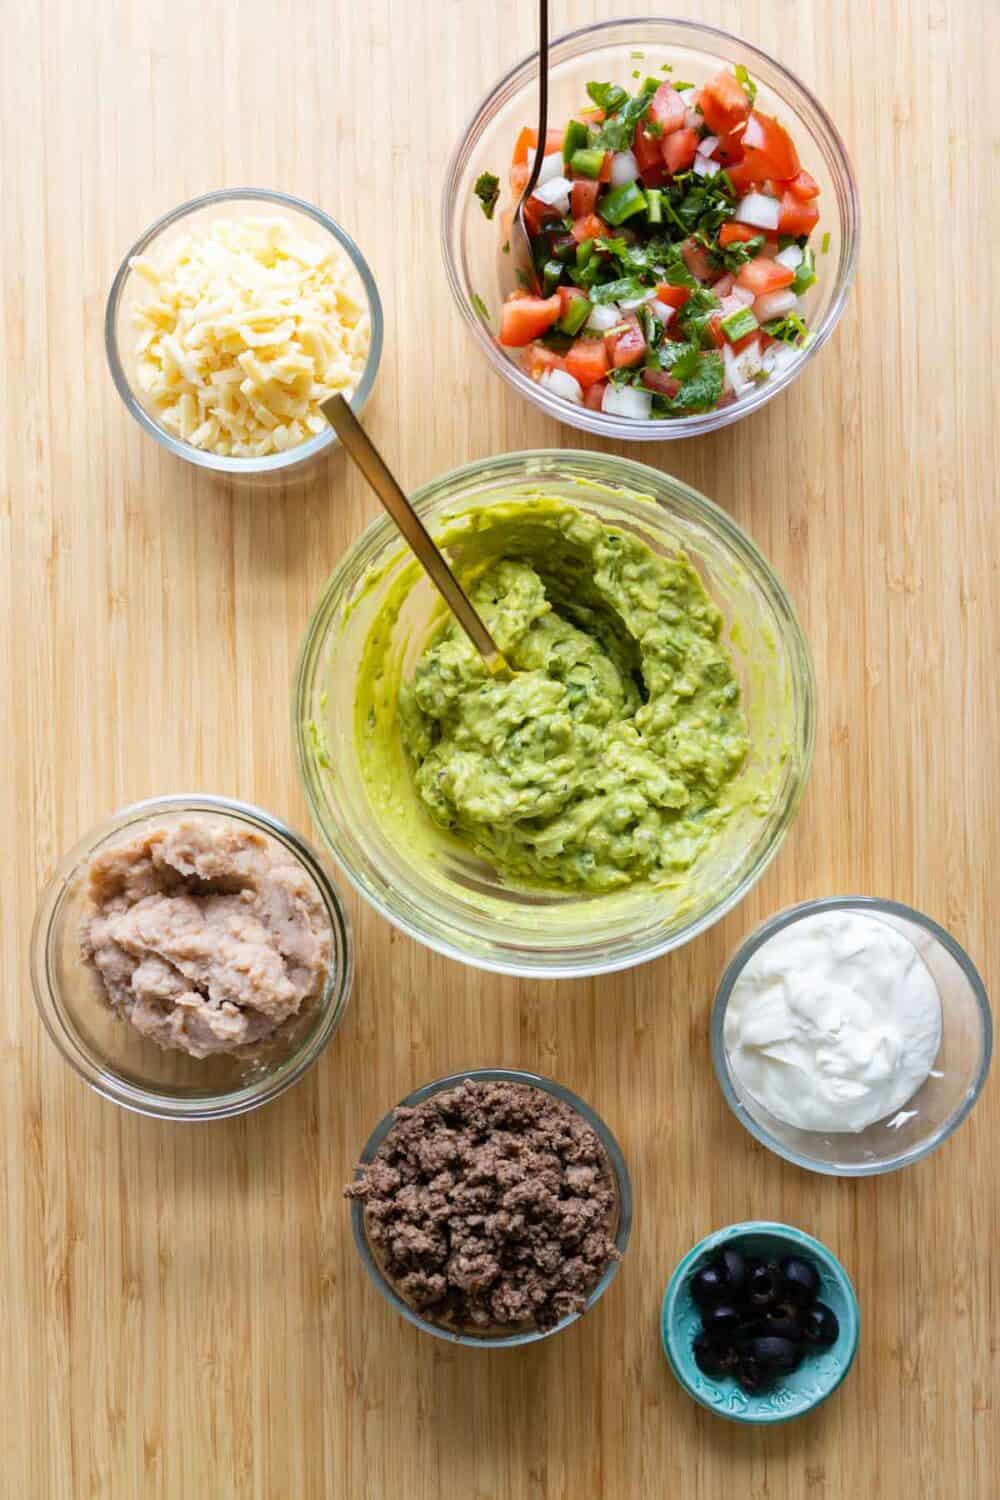 Ingredients for a sophisticated 7-Layer Dip laid out on a kitchen counter.